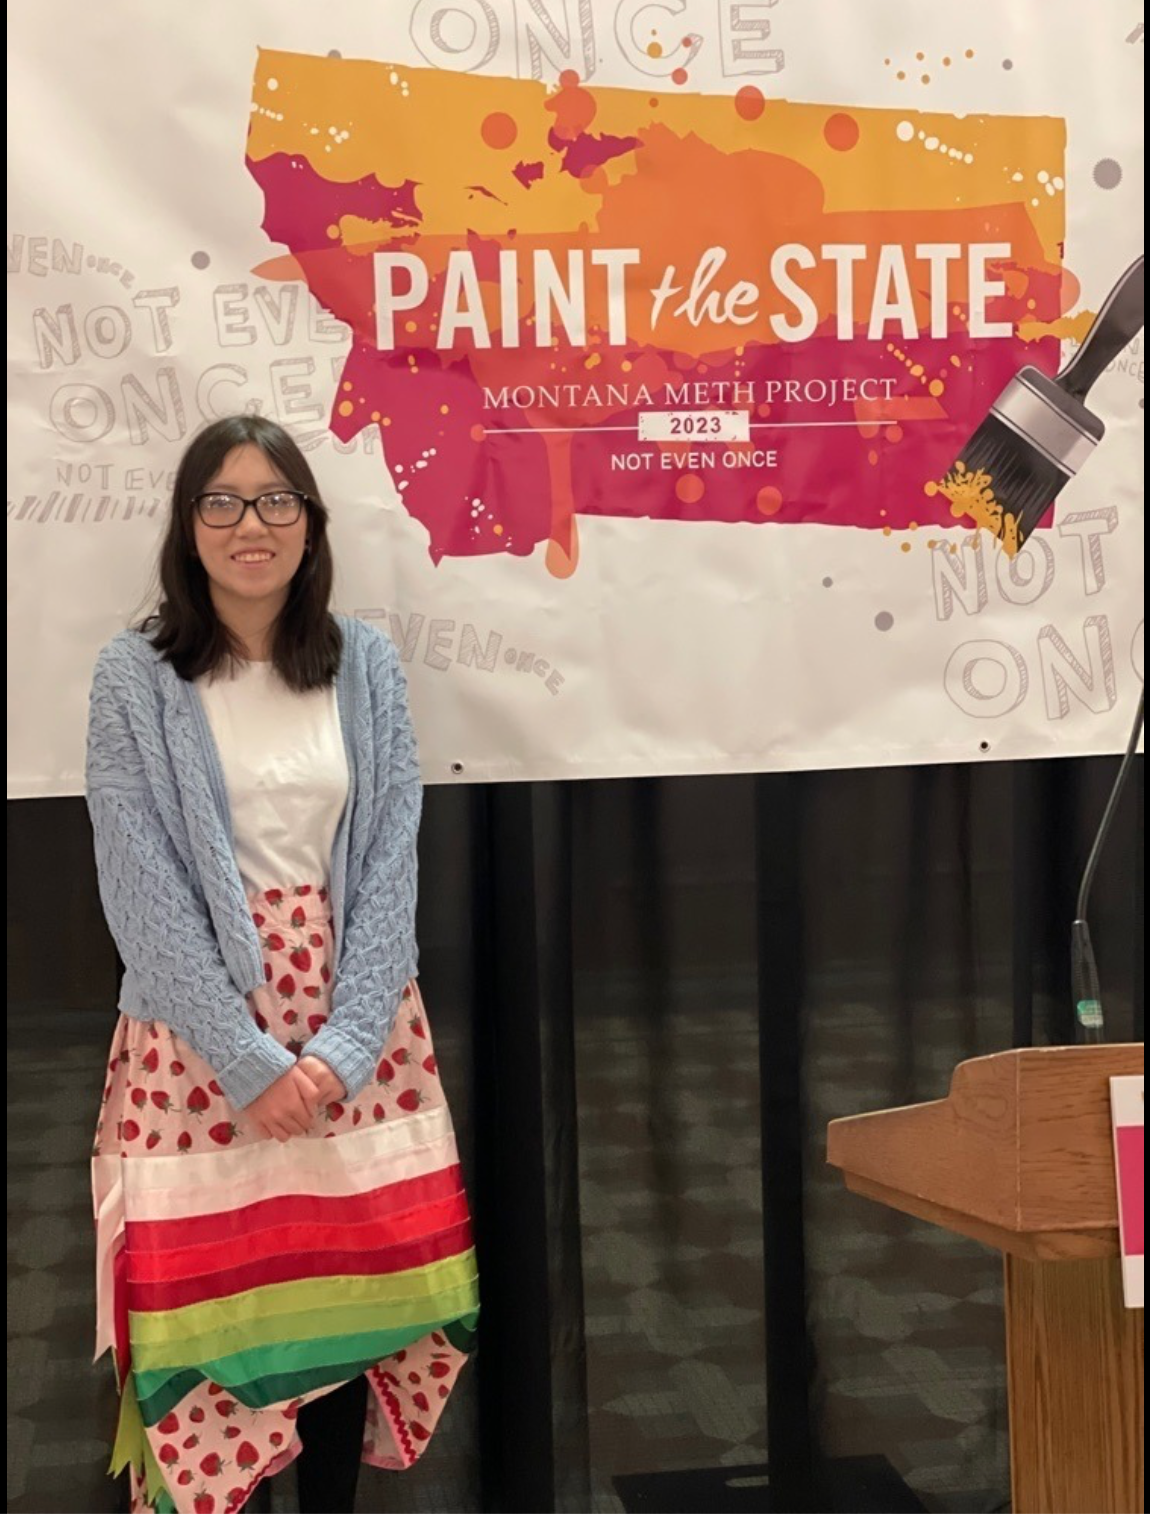 Our very own AMAZING Senior, Juliet MacDonald spoke with the Governor and many others at the Capitol Rotunda as the student voice for the Montana Meth Project, "Paint the State".  Juliet has created an original piece of artwork that will be an entry in the contest and we couldn't be more proud of her!